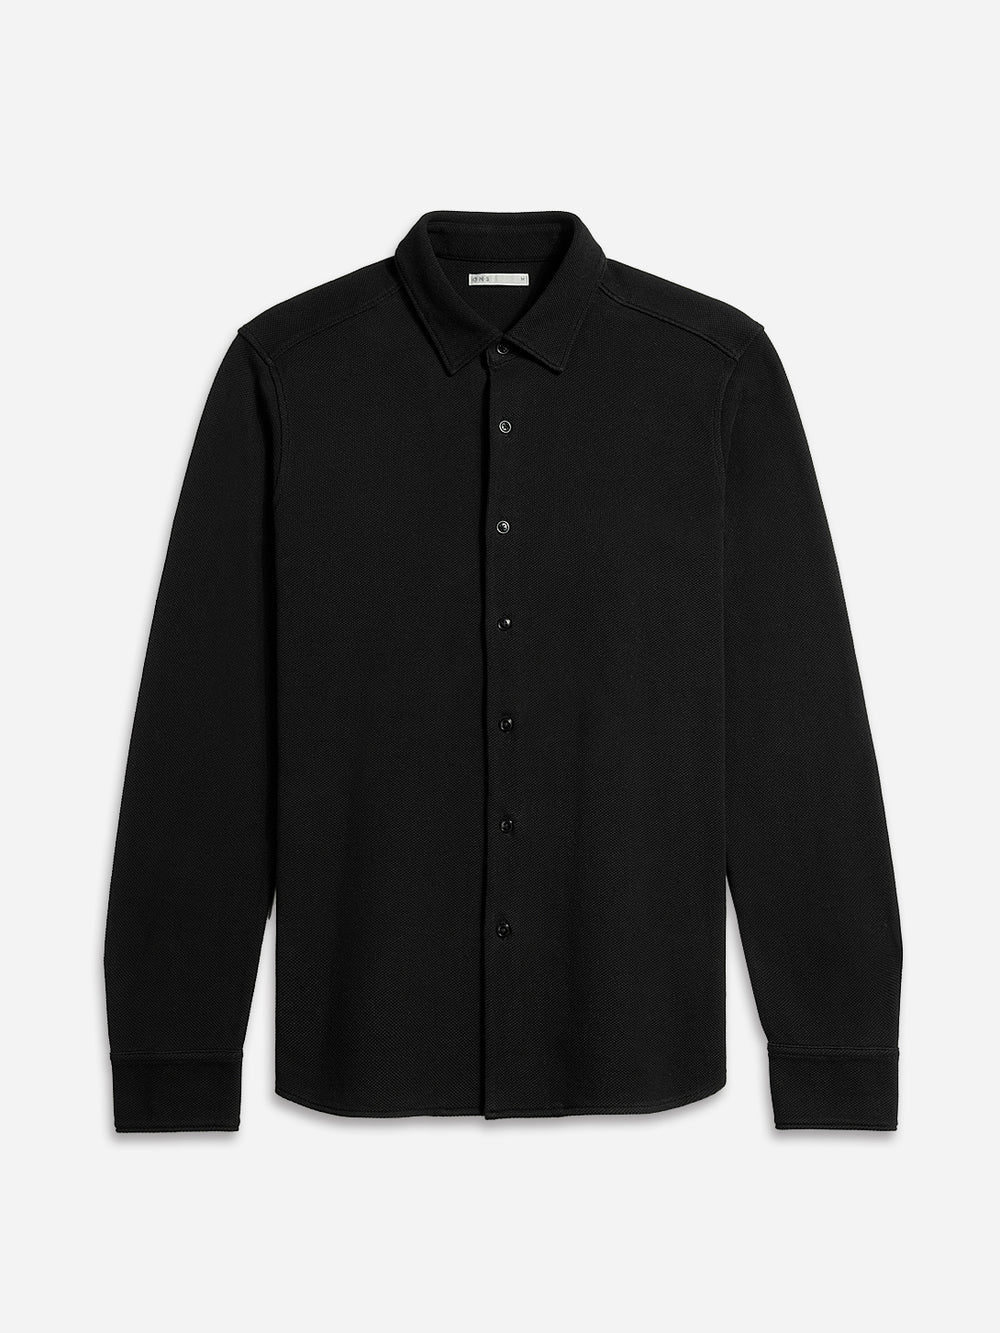 Black Darcy Knit Men's O.N.S Button Up Shirt